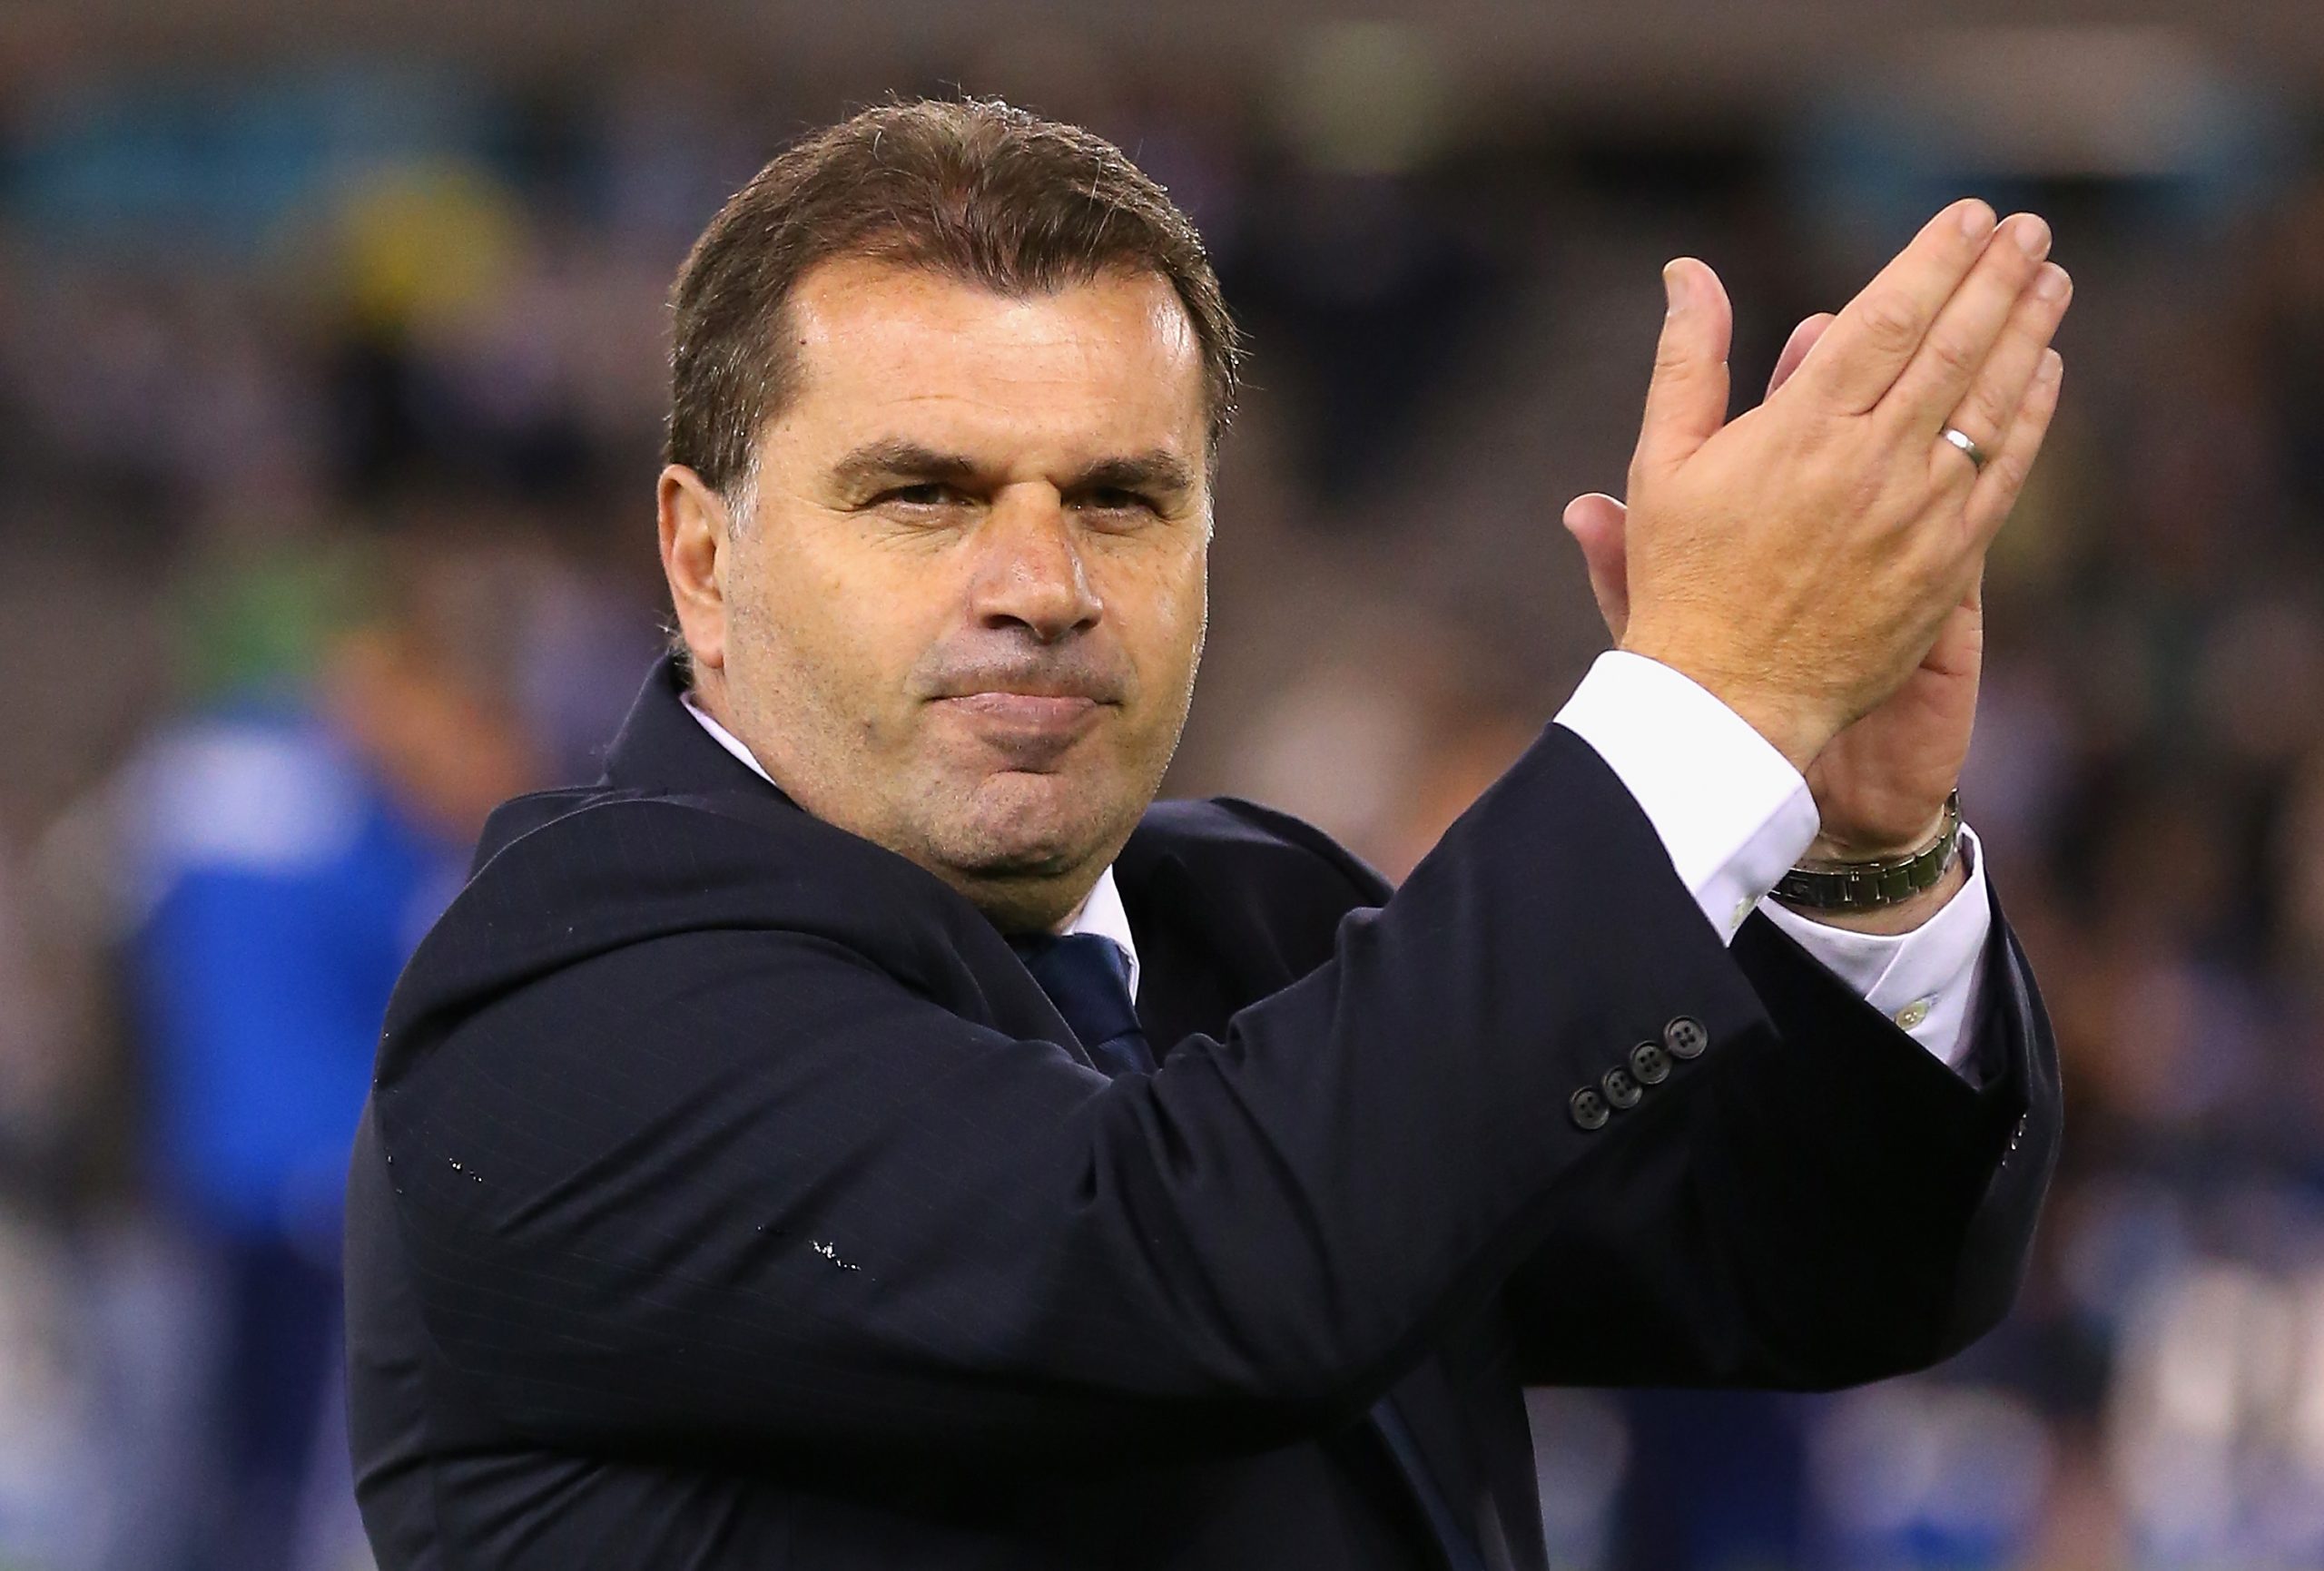 Tottenham will make a formal approach for Ange Postecoglou next week.